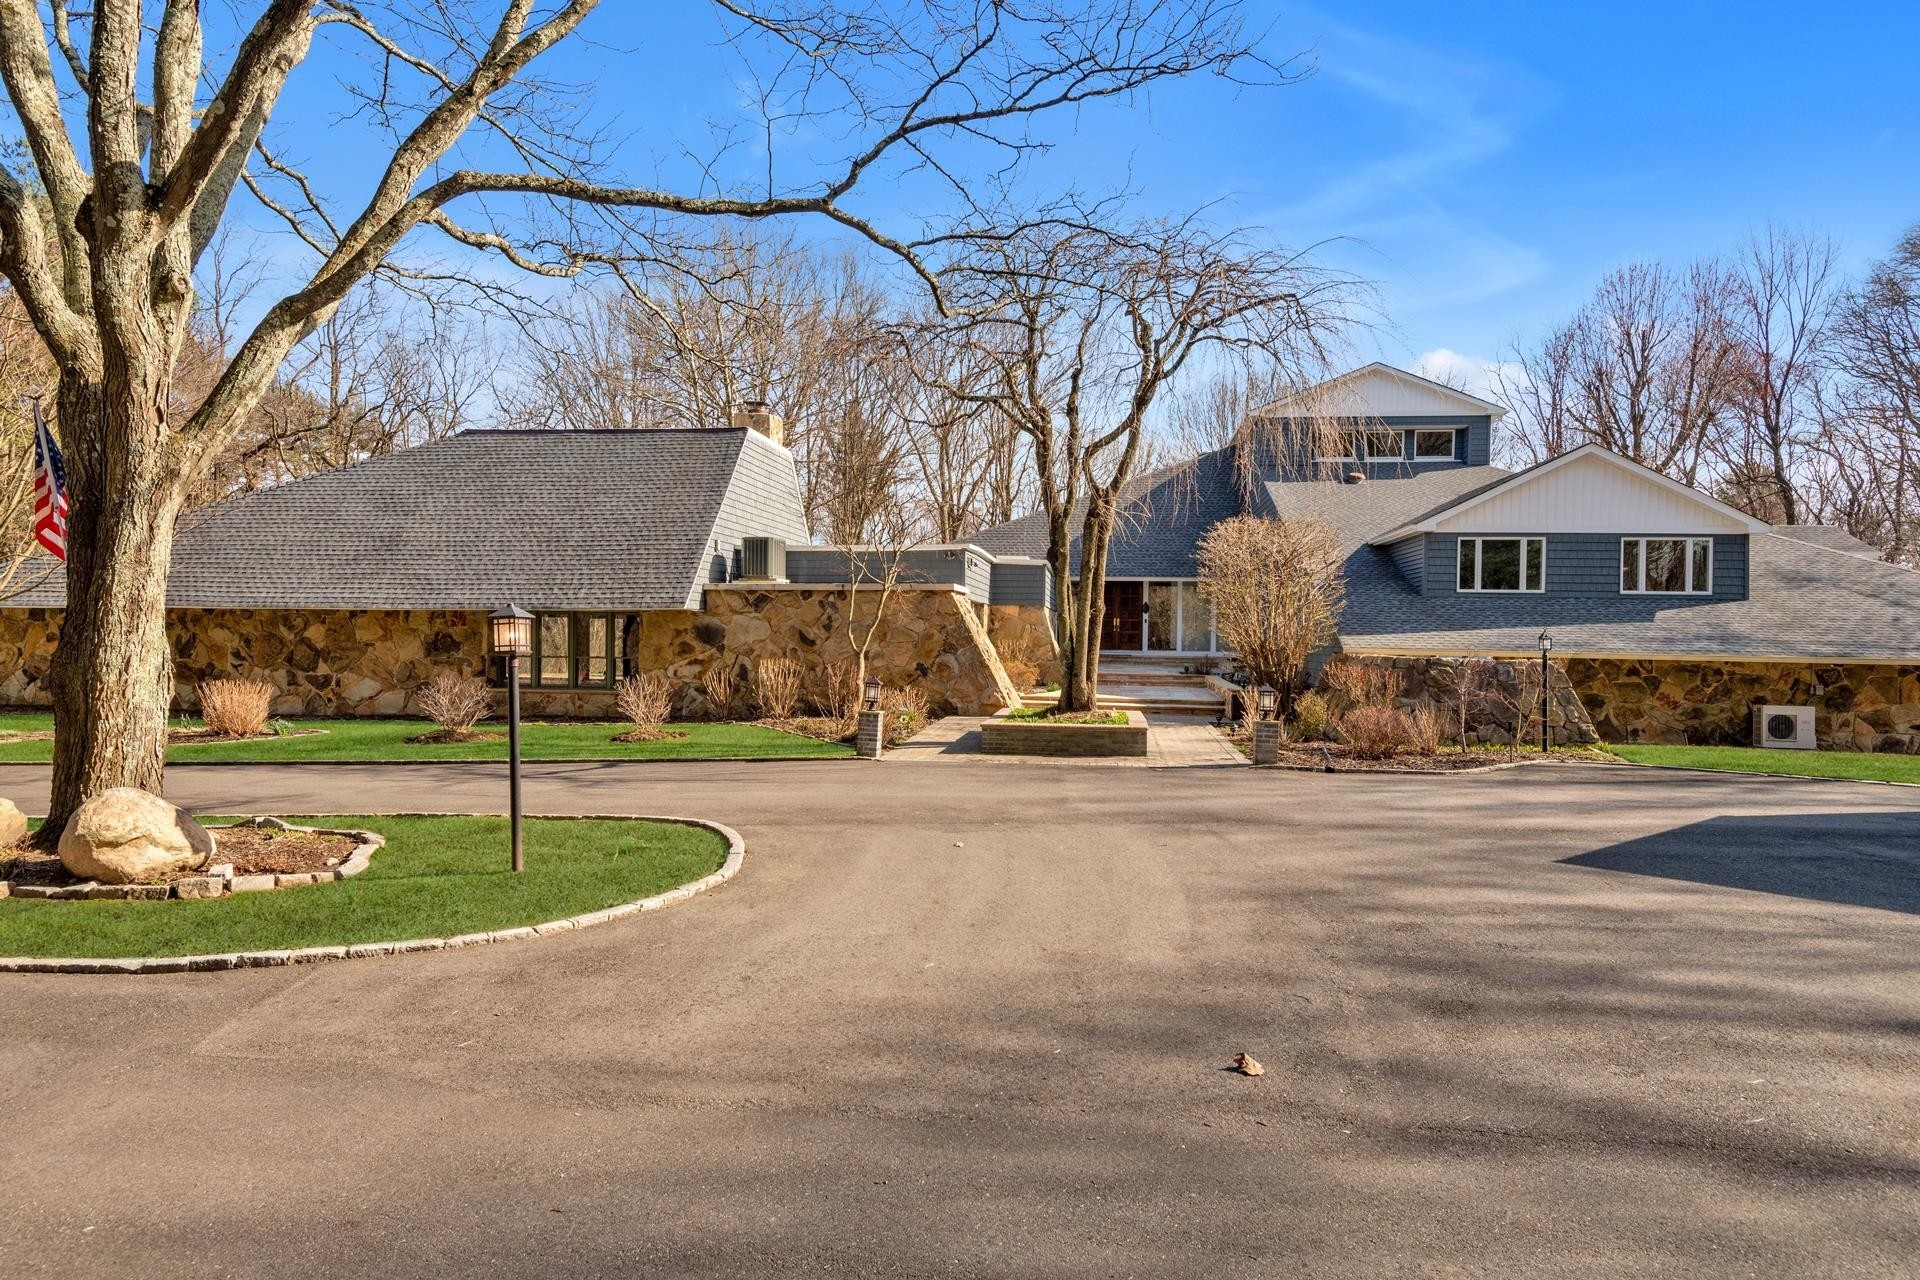 Single Family Home at Locust Valley